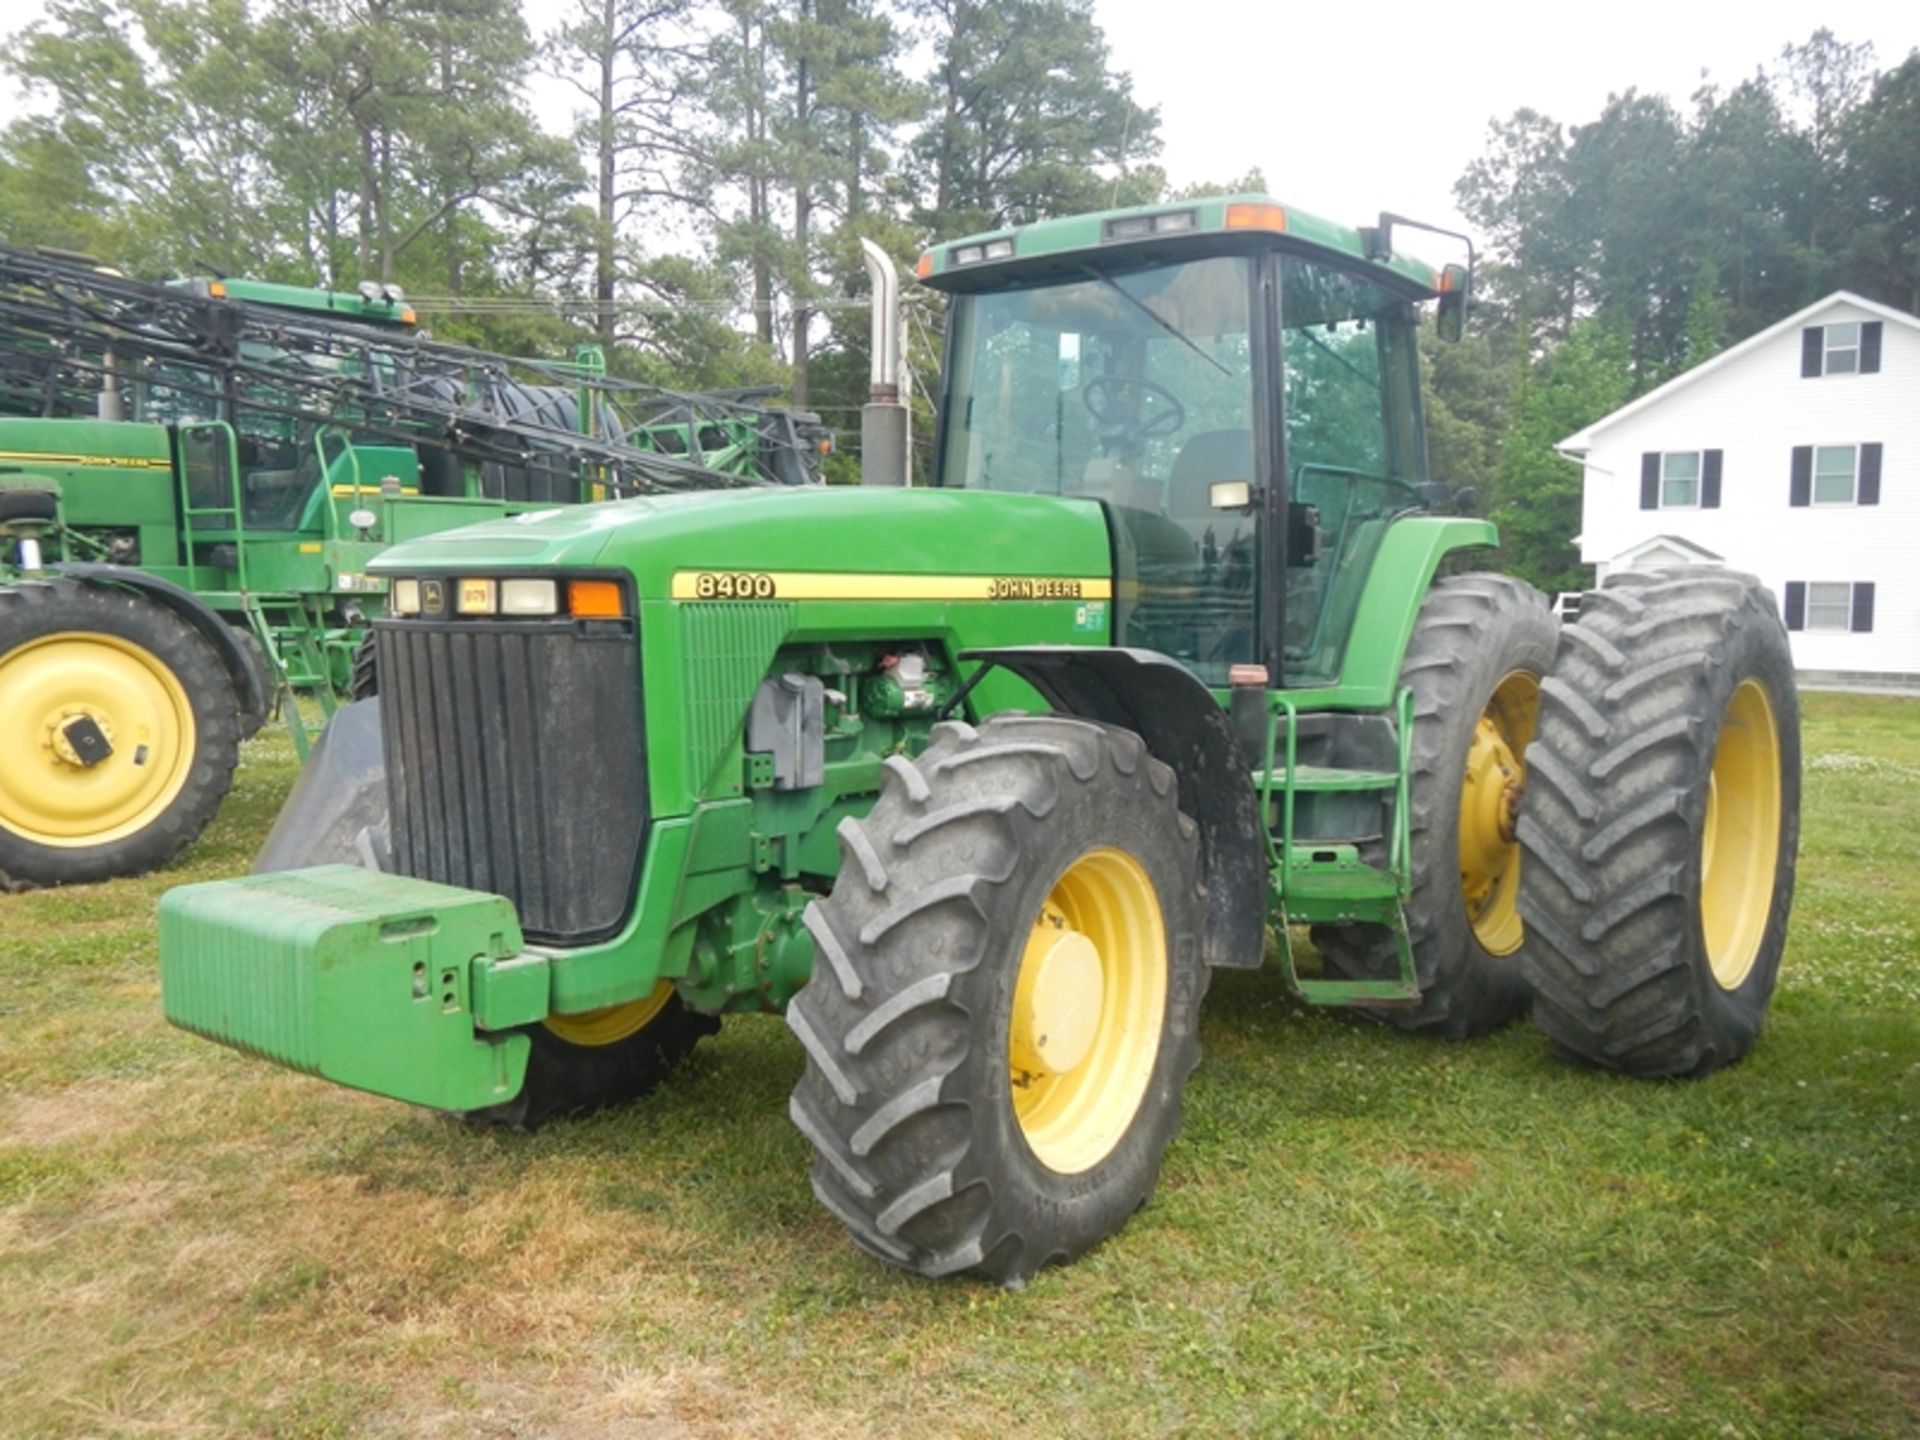 JOHN DEERE 8400 tractor - 4wd, 7,515 hrs - Serial RW8400P011798 520/85R42 duals quick hitch